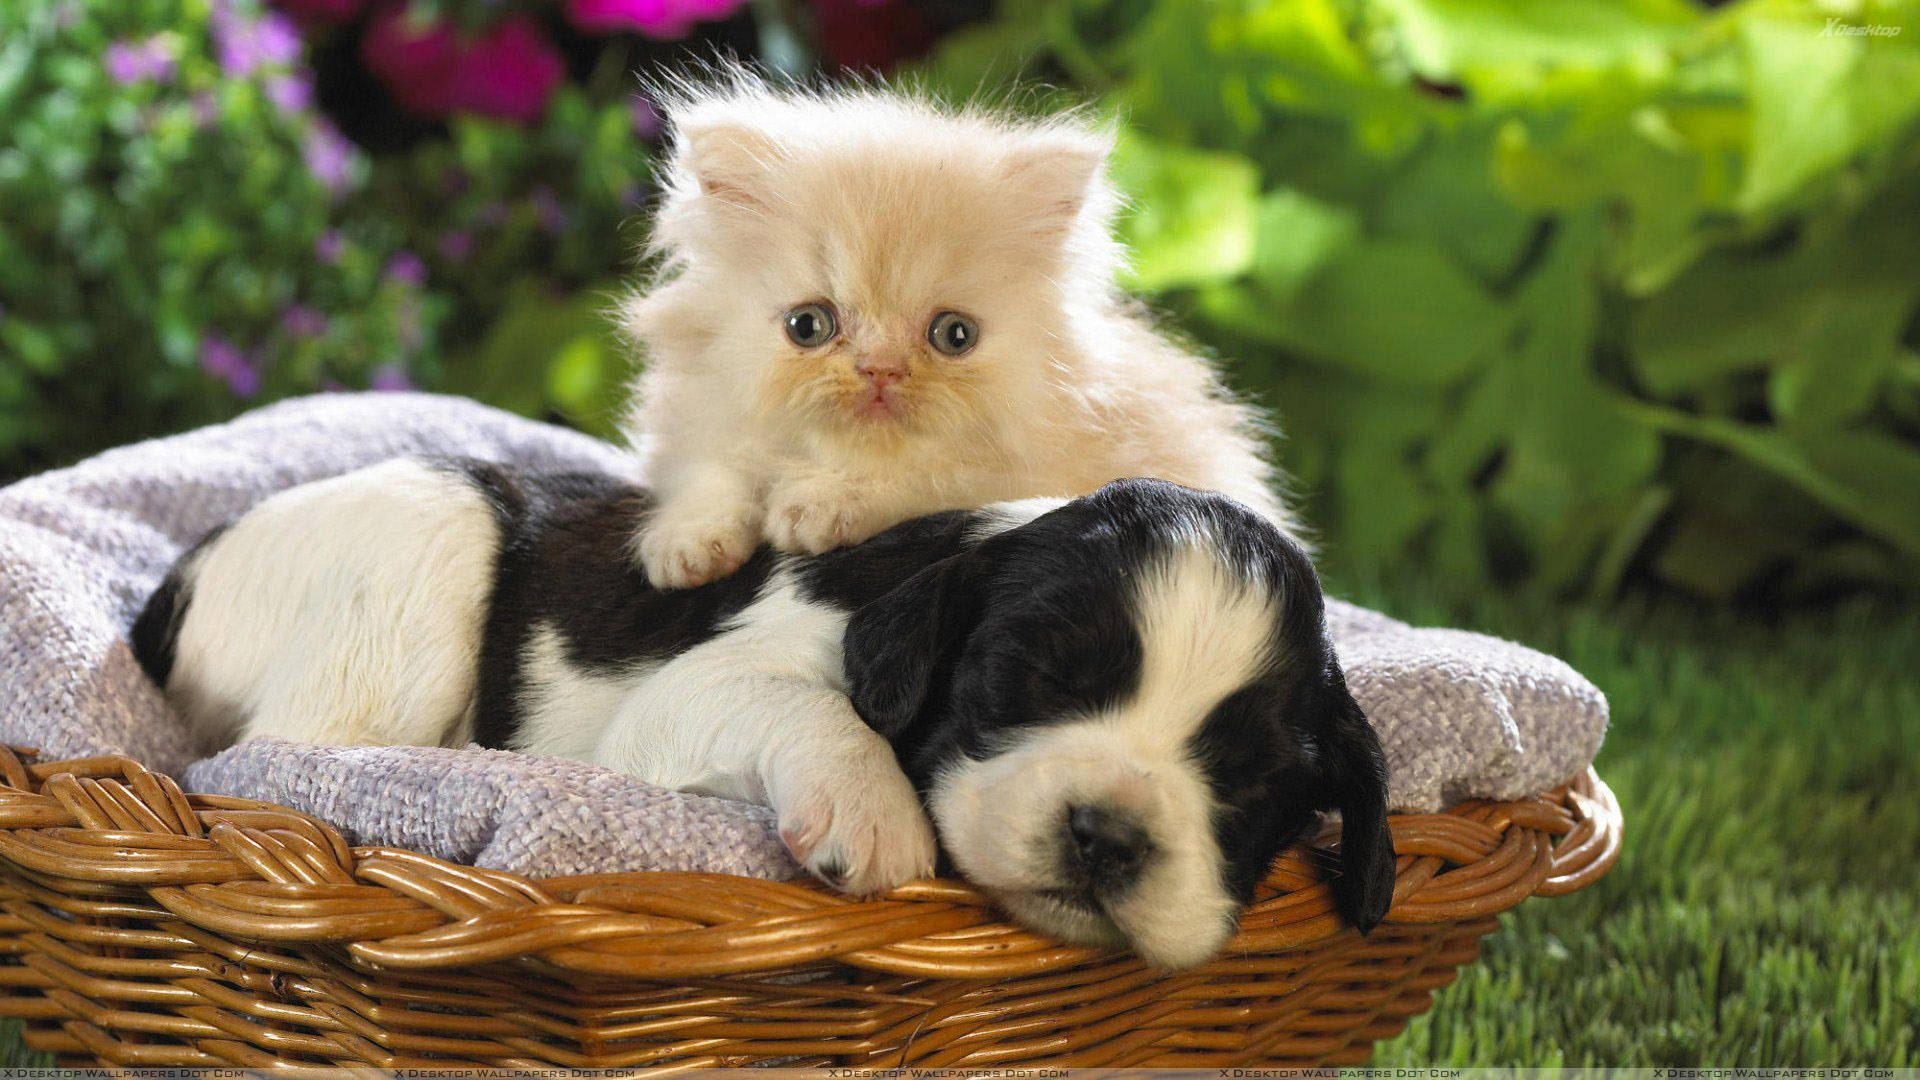 Cat And Dog In A Basket Wallpaper